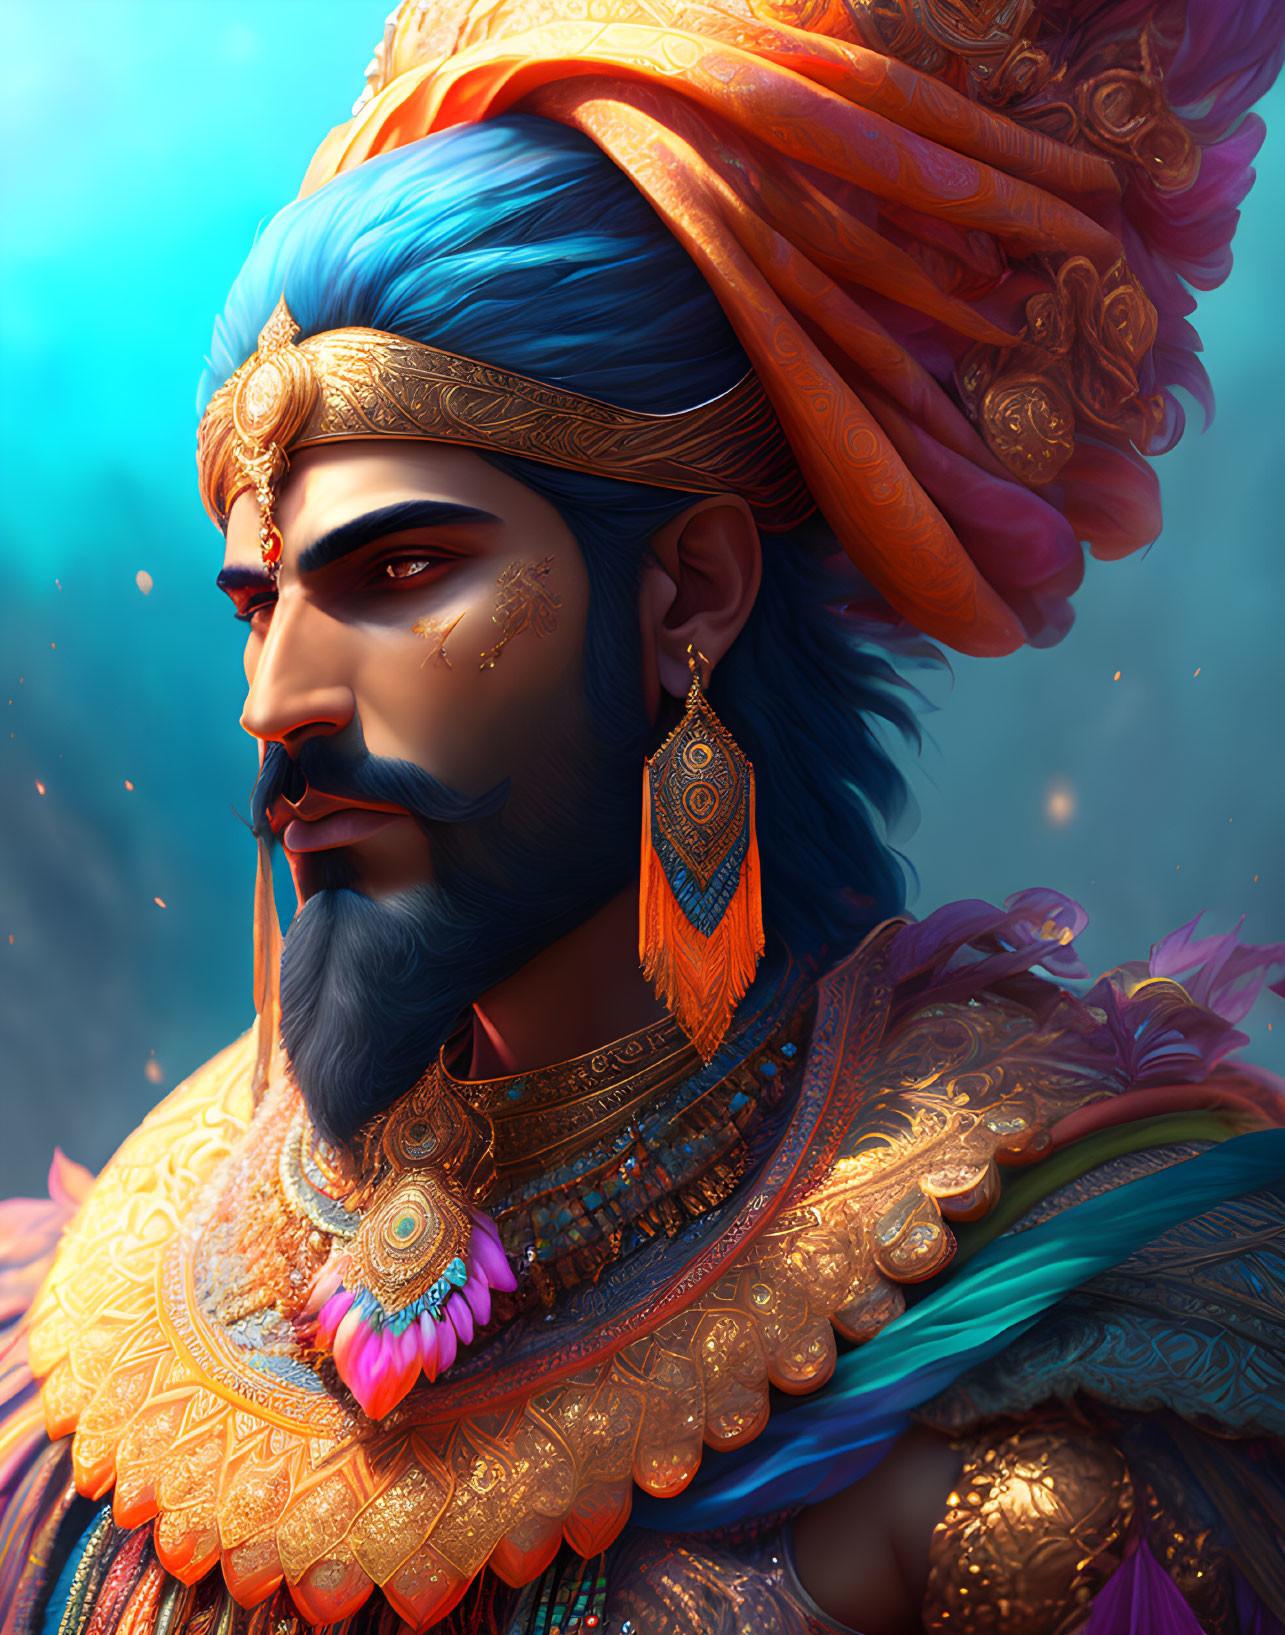 Illustration of man in golden armor with blue beard and turban